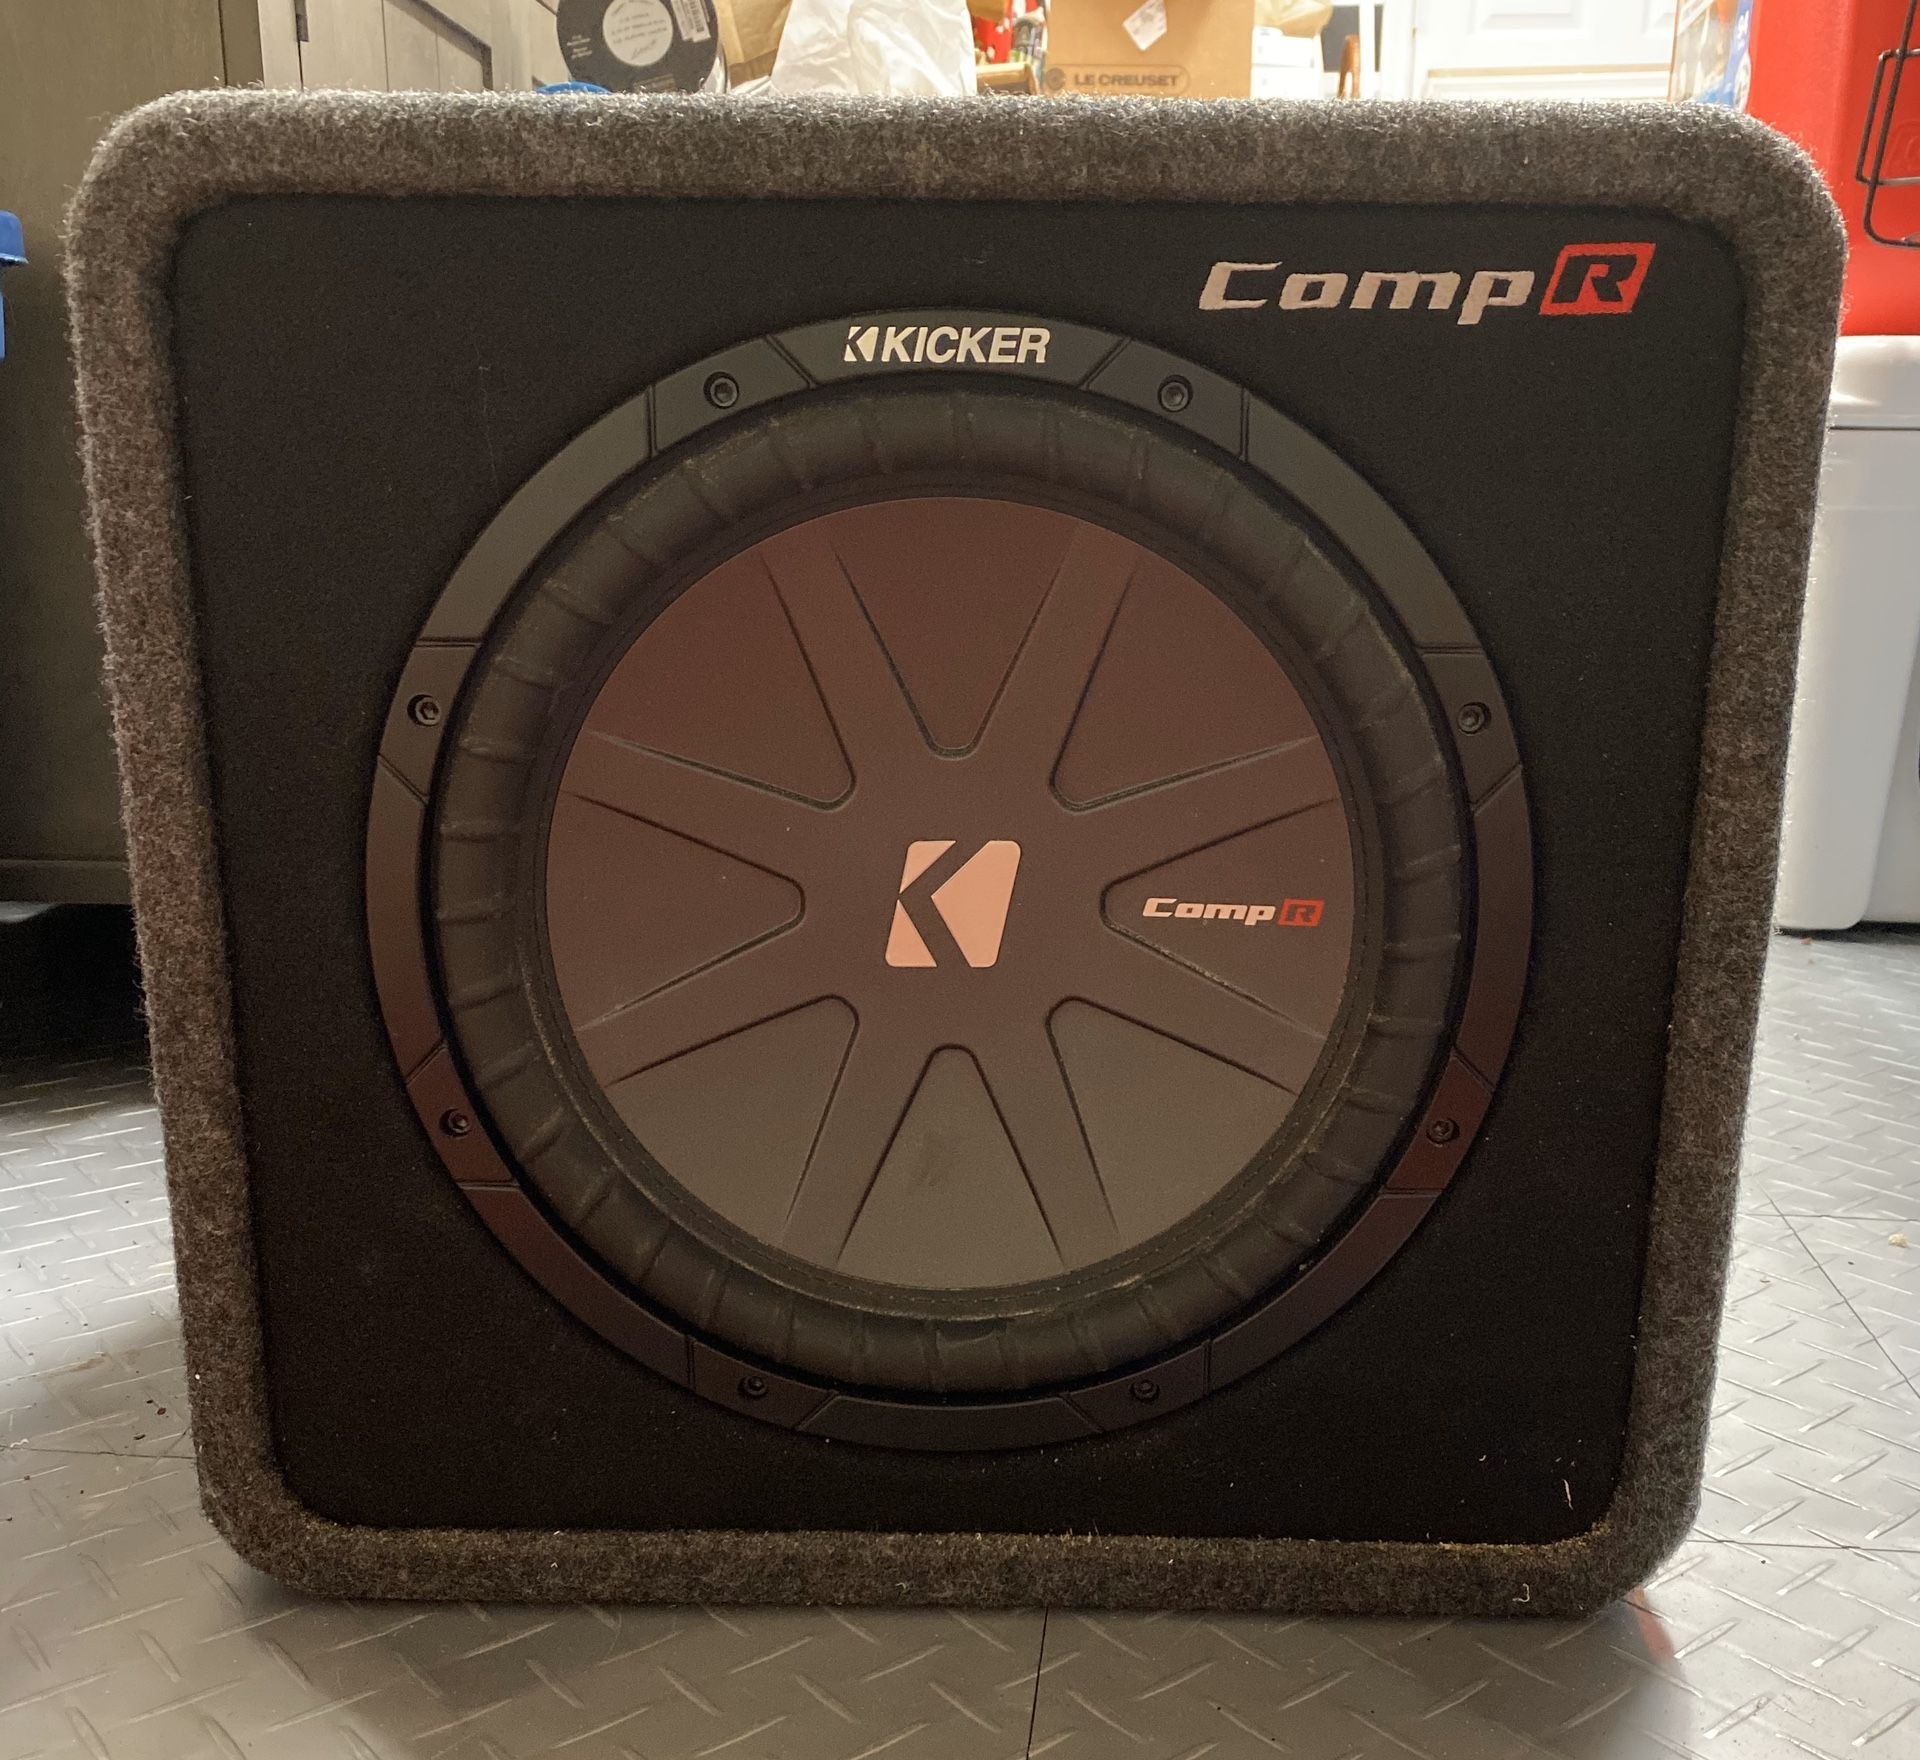 Kicker 12” subwoofer with box and amp